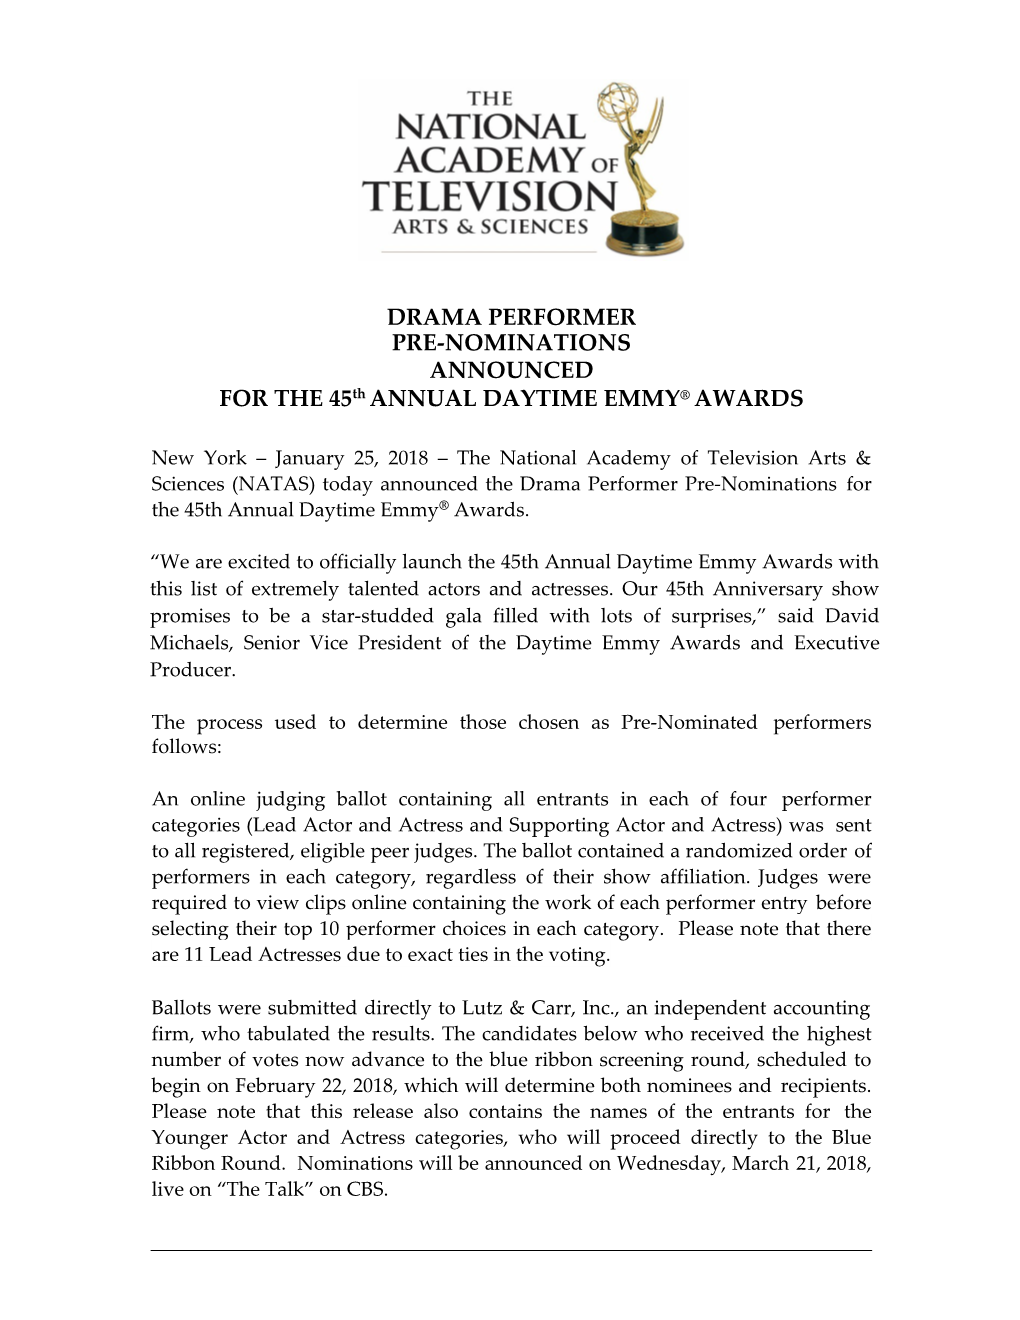 FOR the 45Th ANNUAL DAYTIME EMMY AWARDS